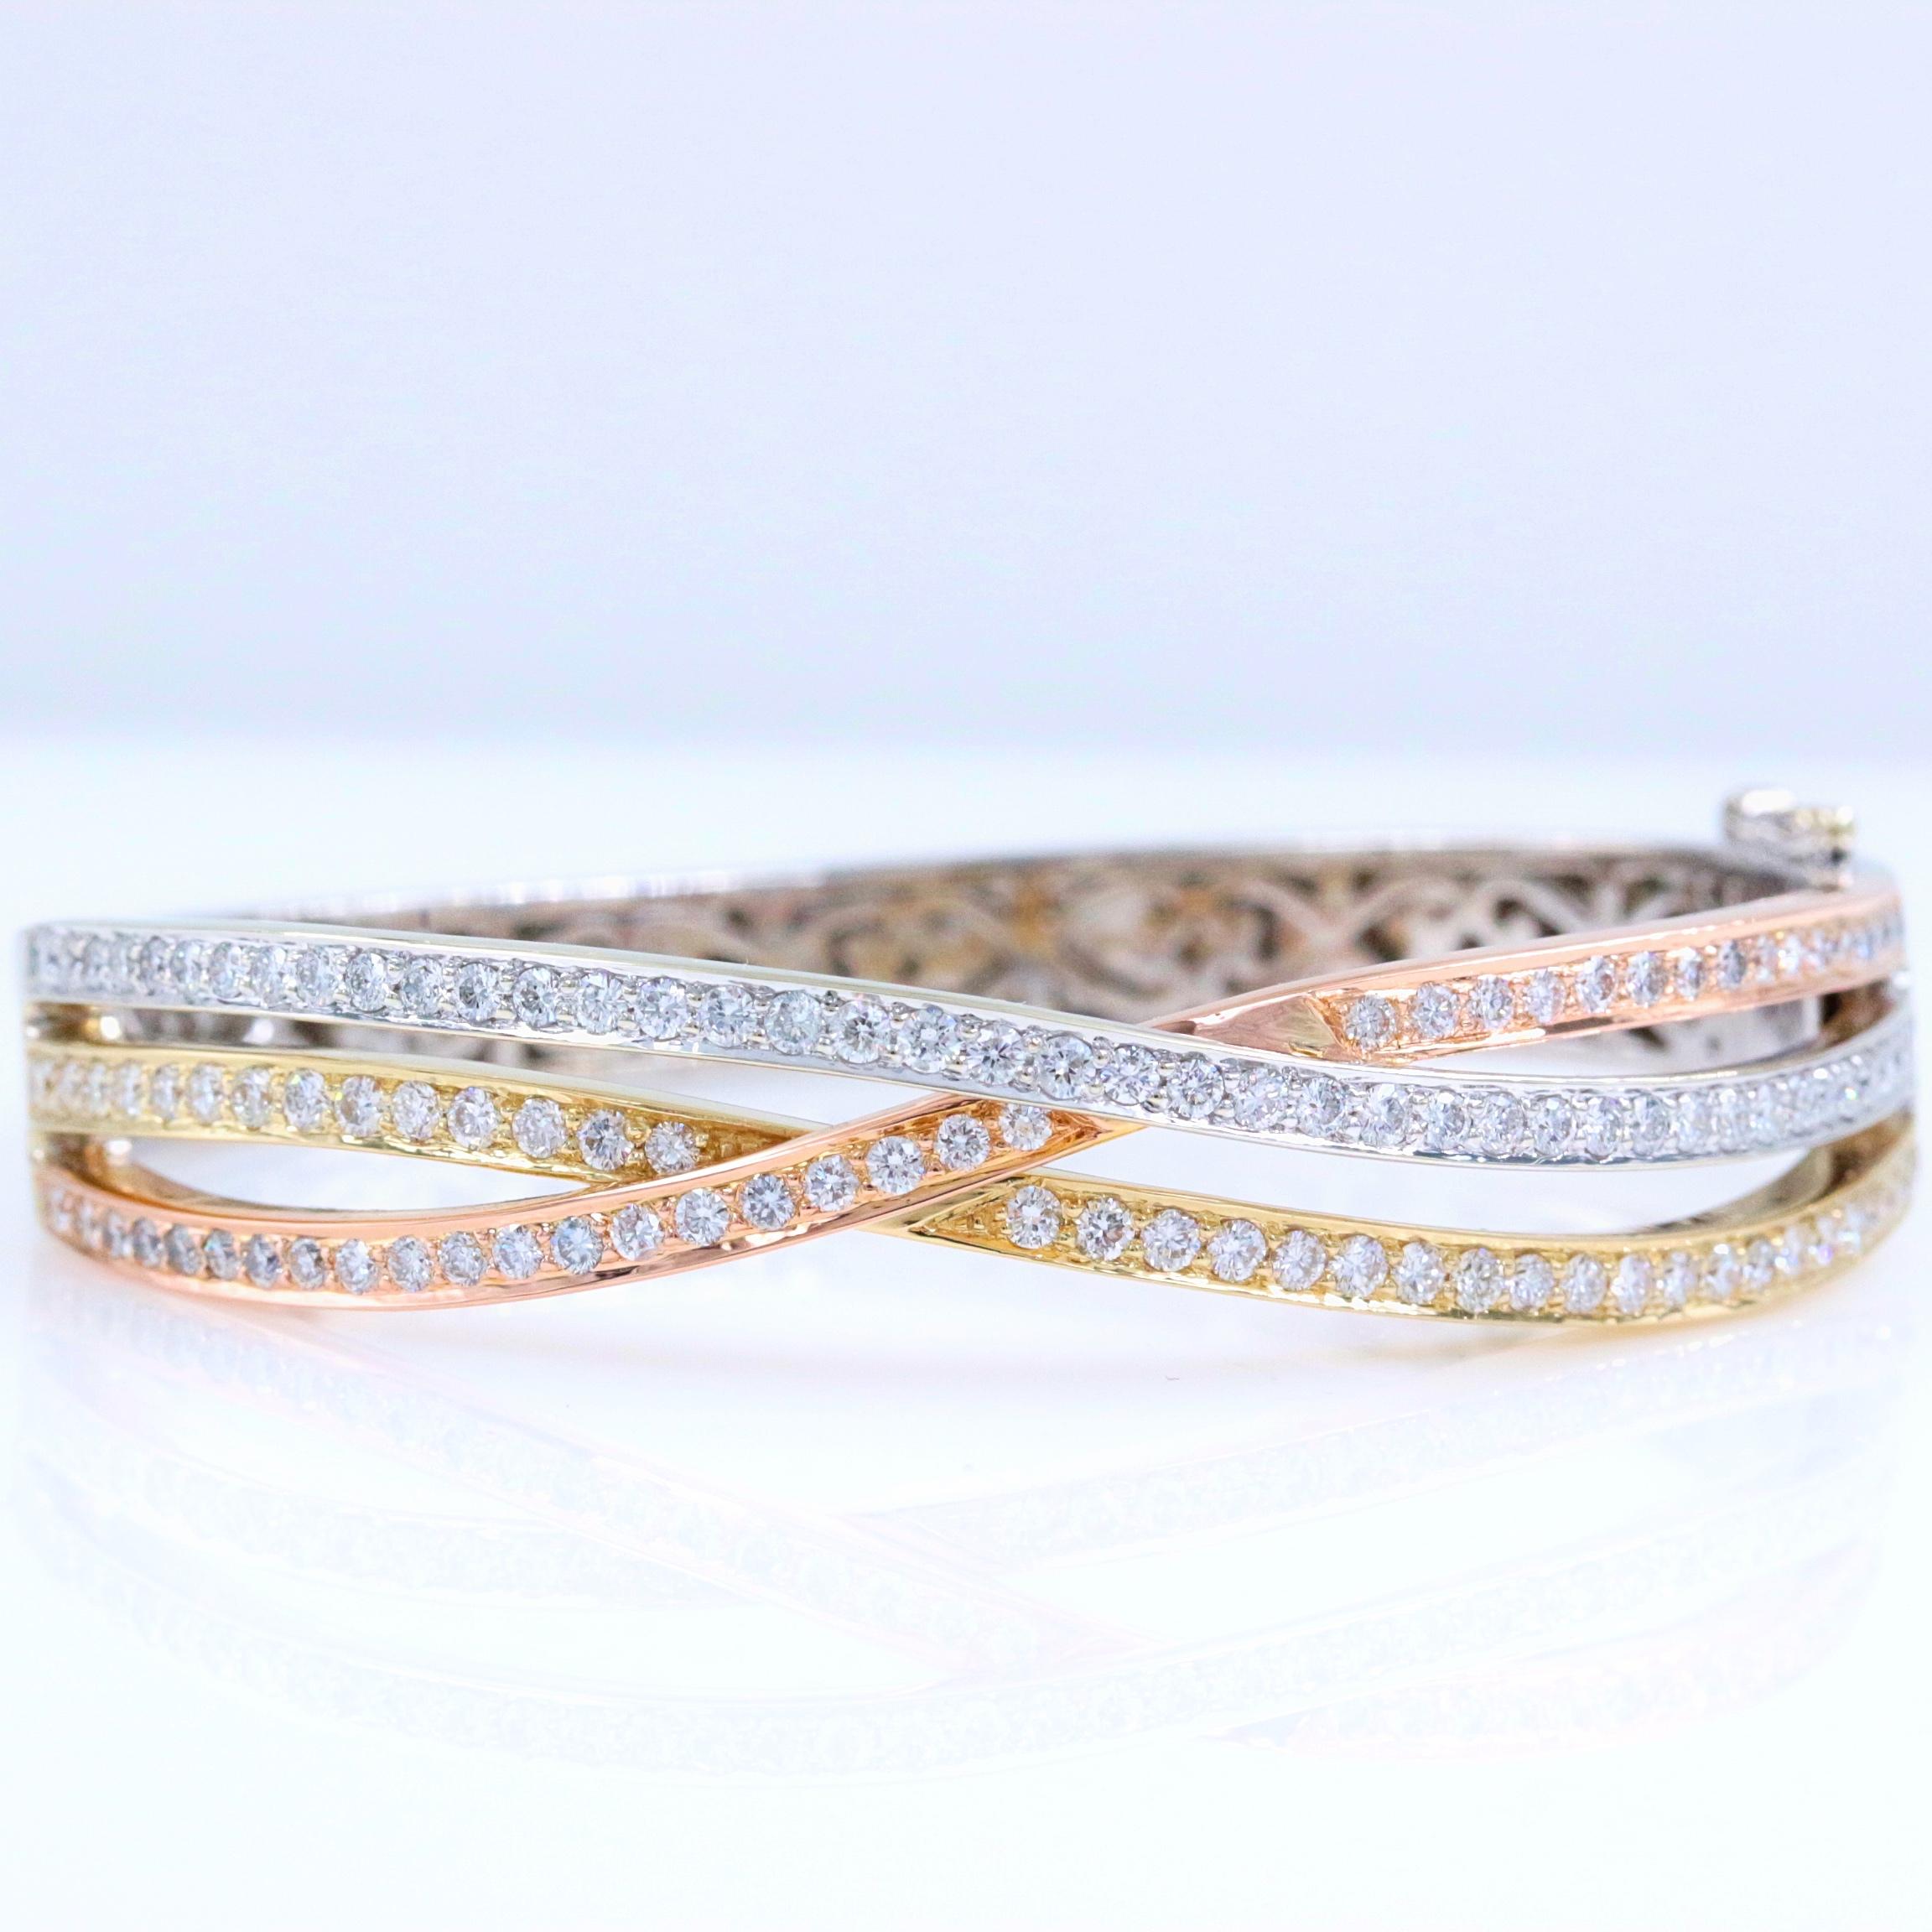 Tri-Color Round Diamonds Bangle Bracelet 
Style: Tri-Color Bangle Bracelet
Metal: 14kt White Yellow Rose Gold
Size: Small
Width: 10 MM at widest point
Measurements: 2.25 X 2 inches - 5.75 inches inside 
Total Carat Weight: 2.00 tcw
Diamond Shape: